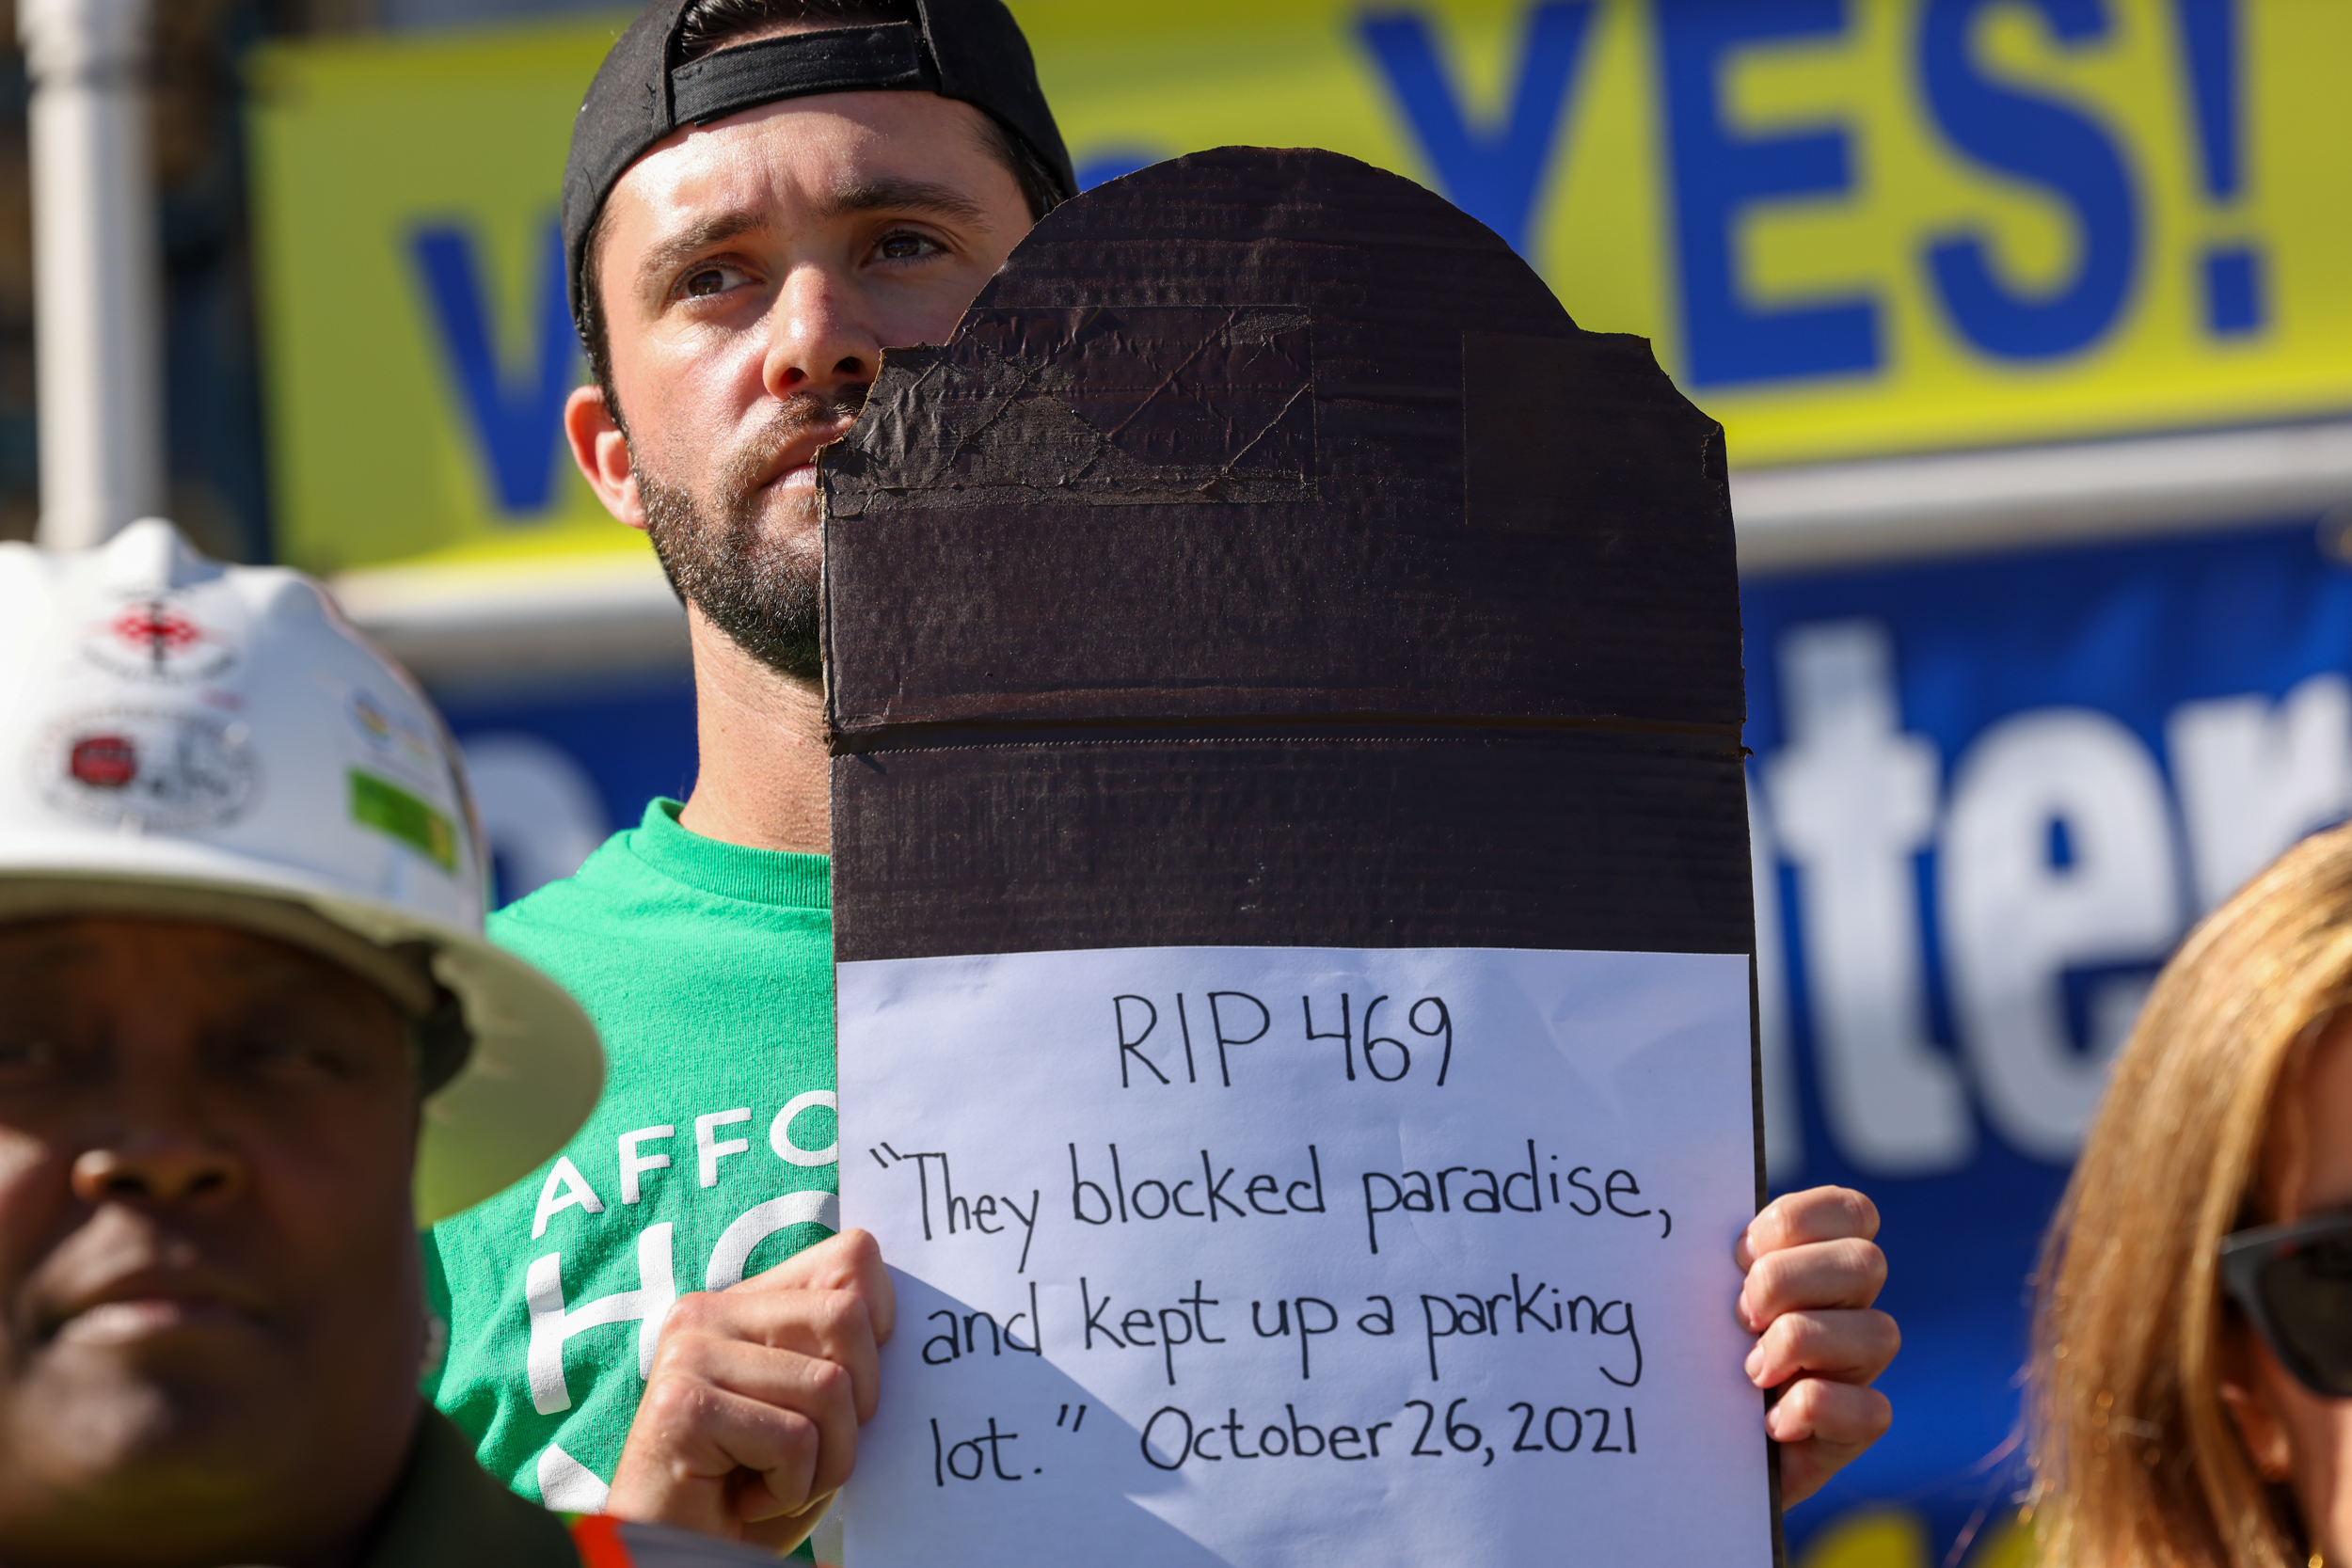 A person is holding up a handmade sign that reads "RIP 469 They blocked paradise, and kept up a parking lot." with the date "October 26, 2021".